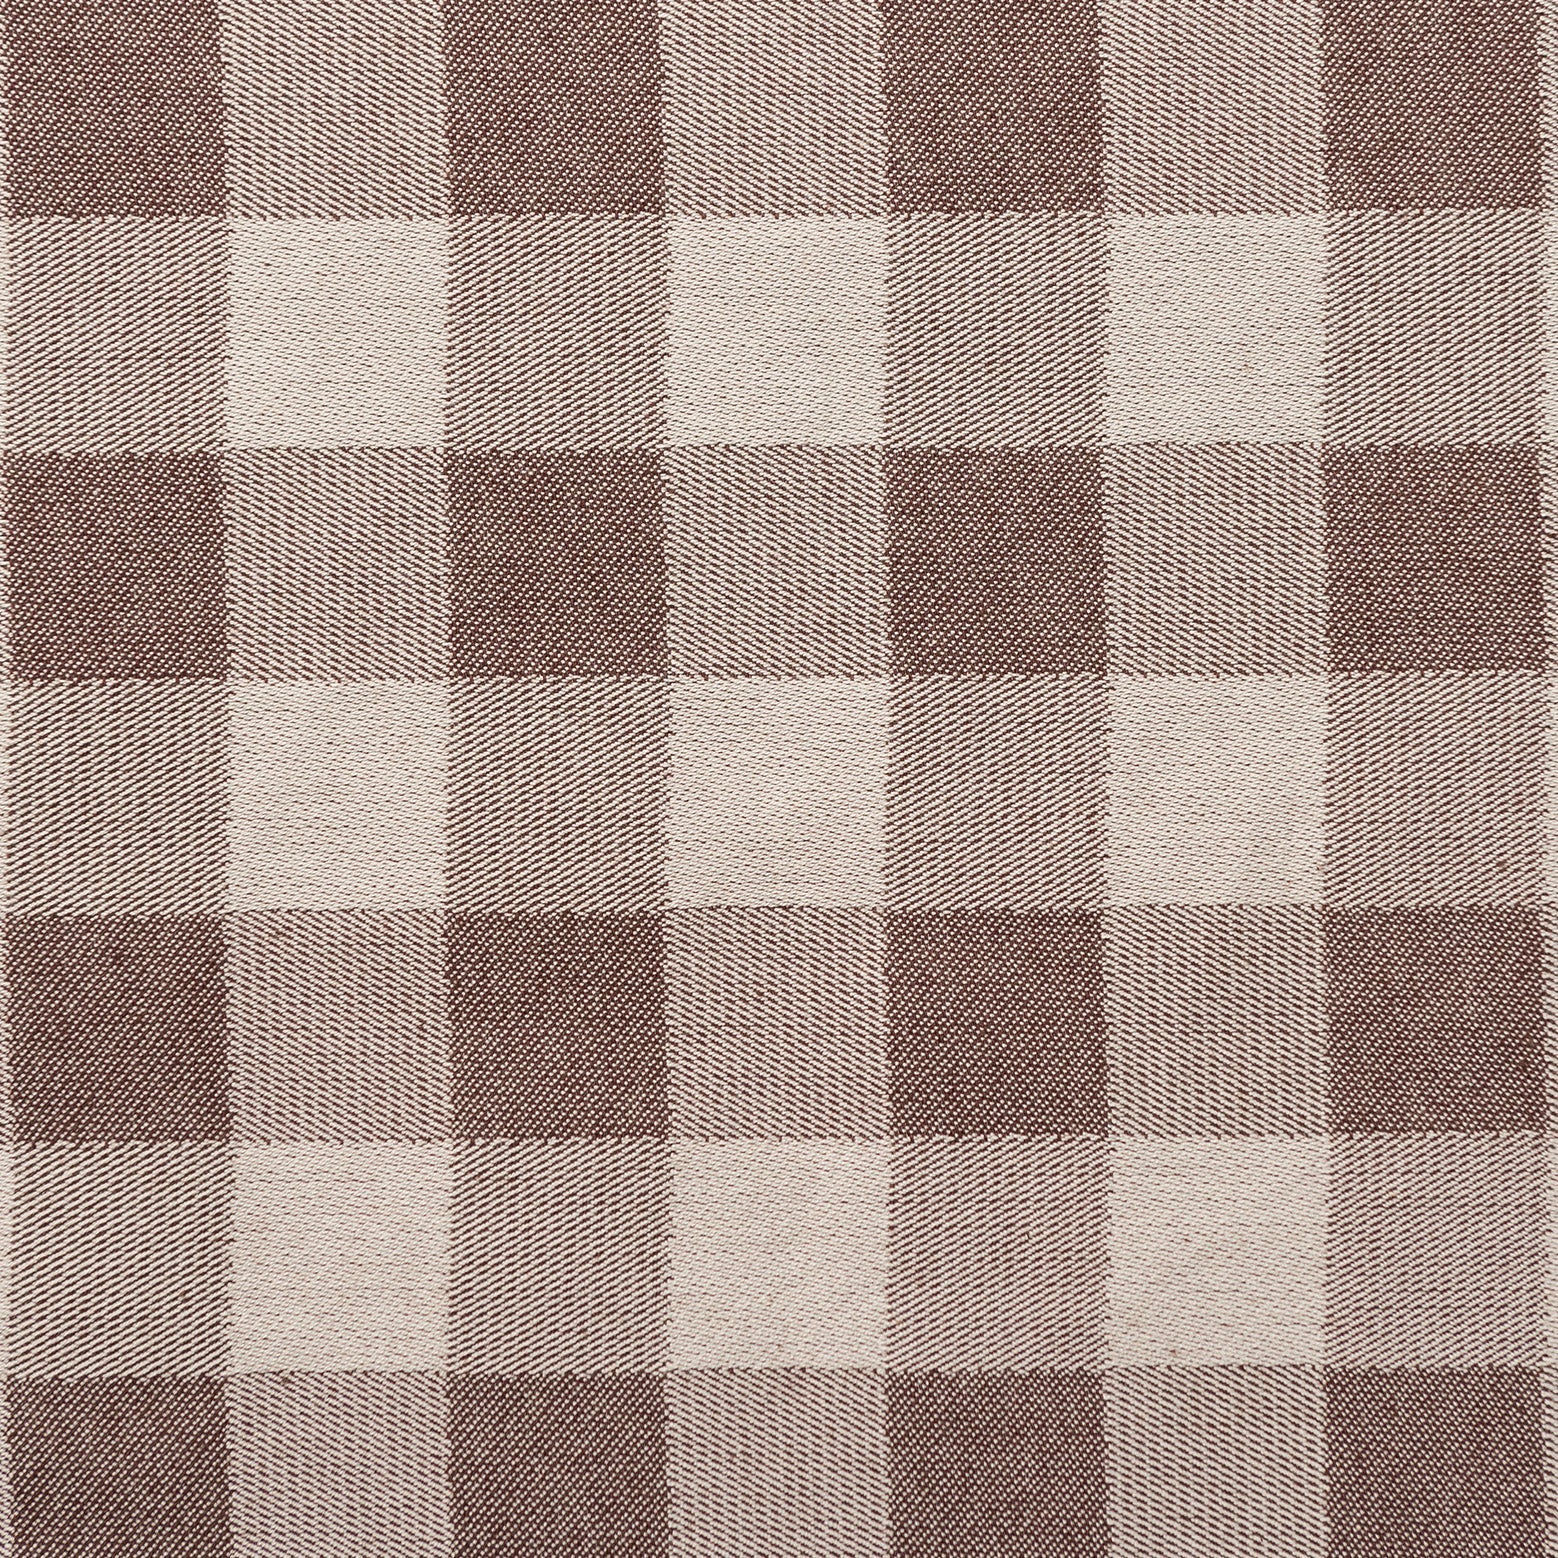 Blind Woodhouse Check Cotton Chestnut